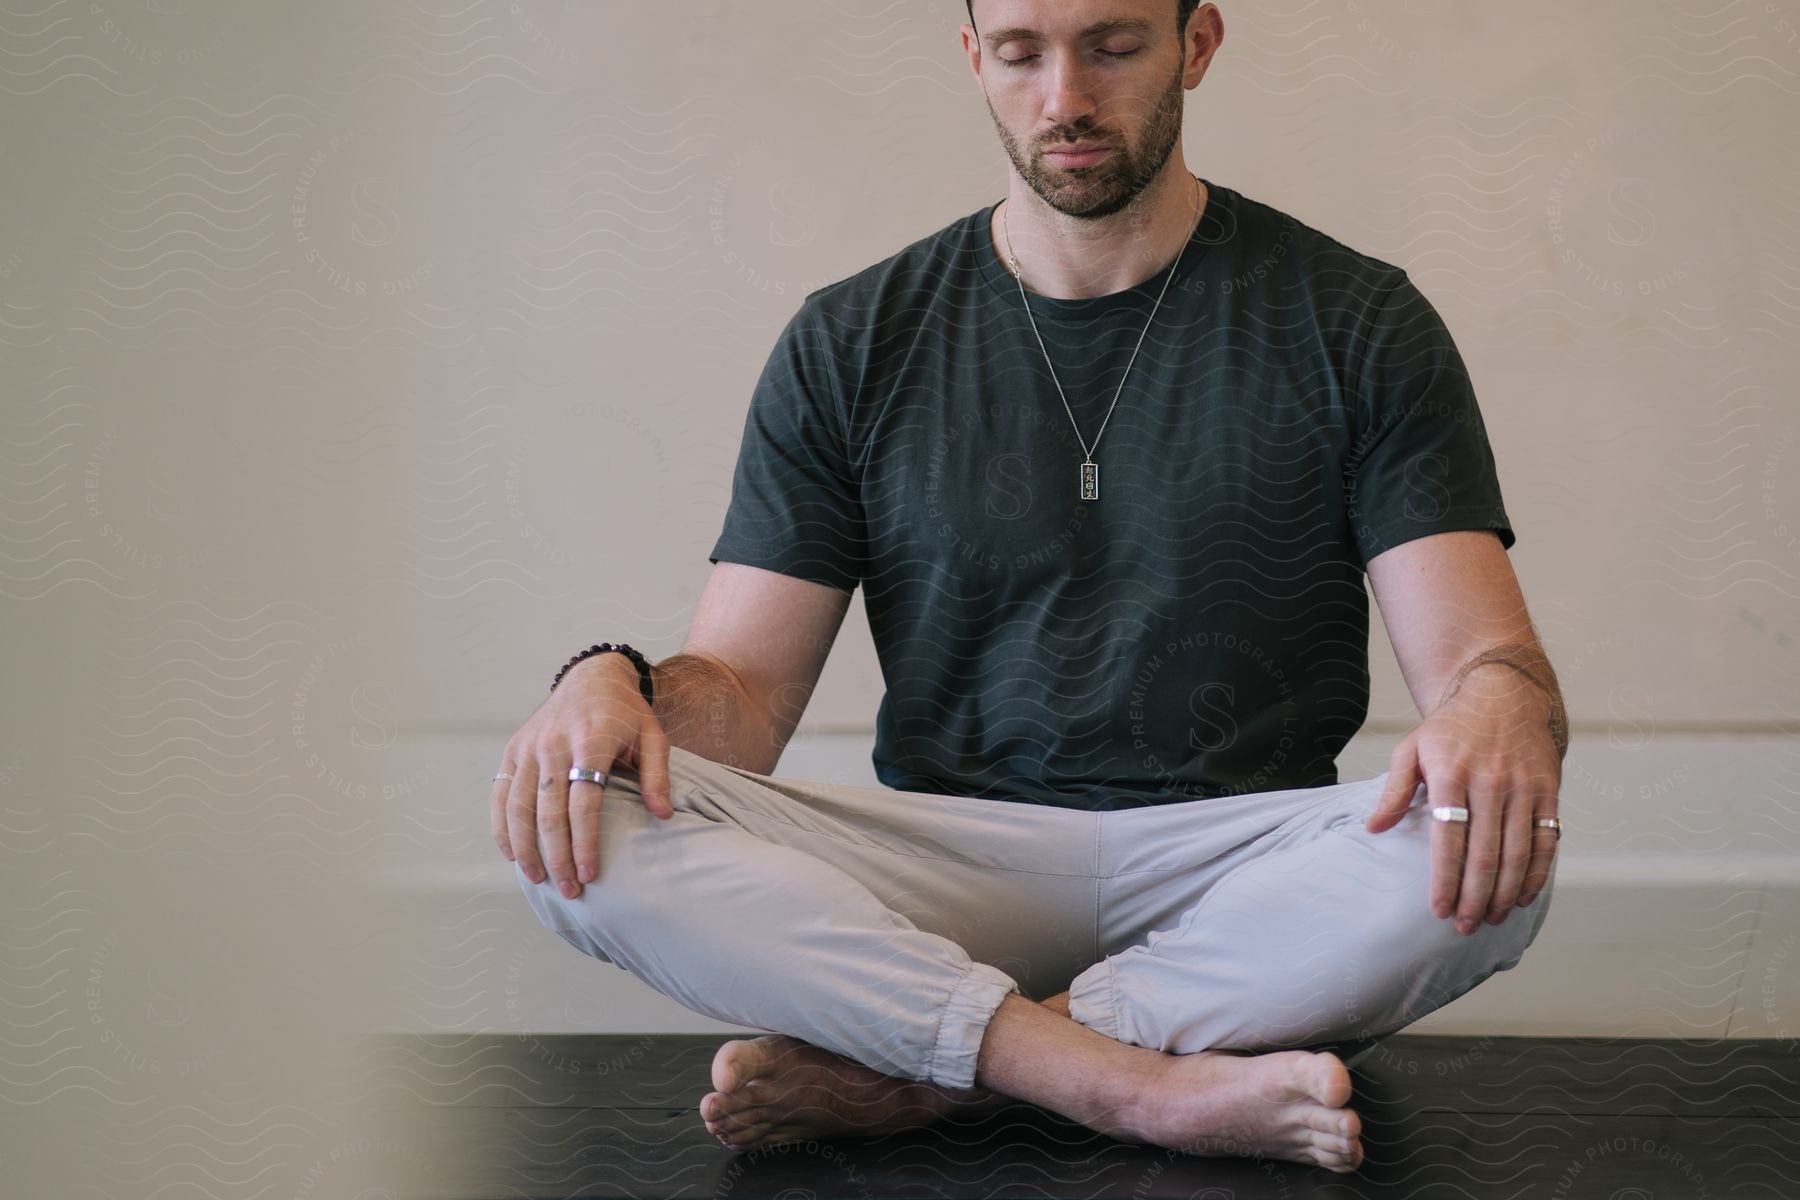 A man is sitting and his hands are on his knees and he has his eyes closed while doing yoga